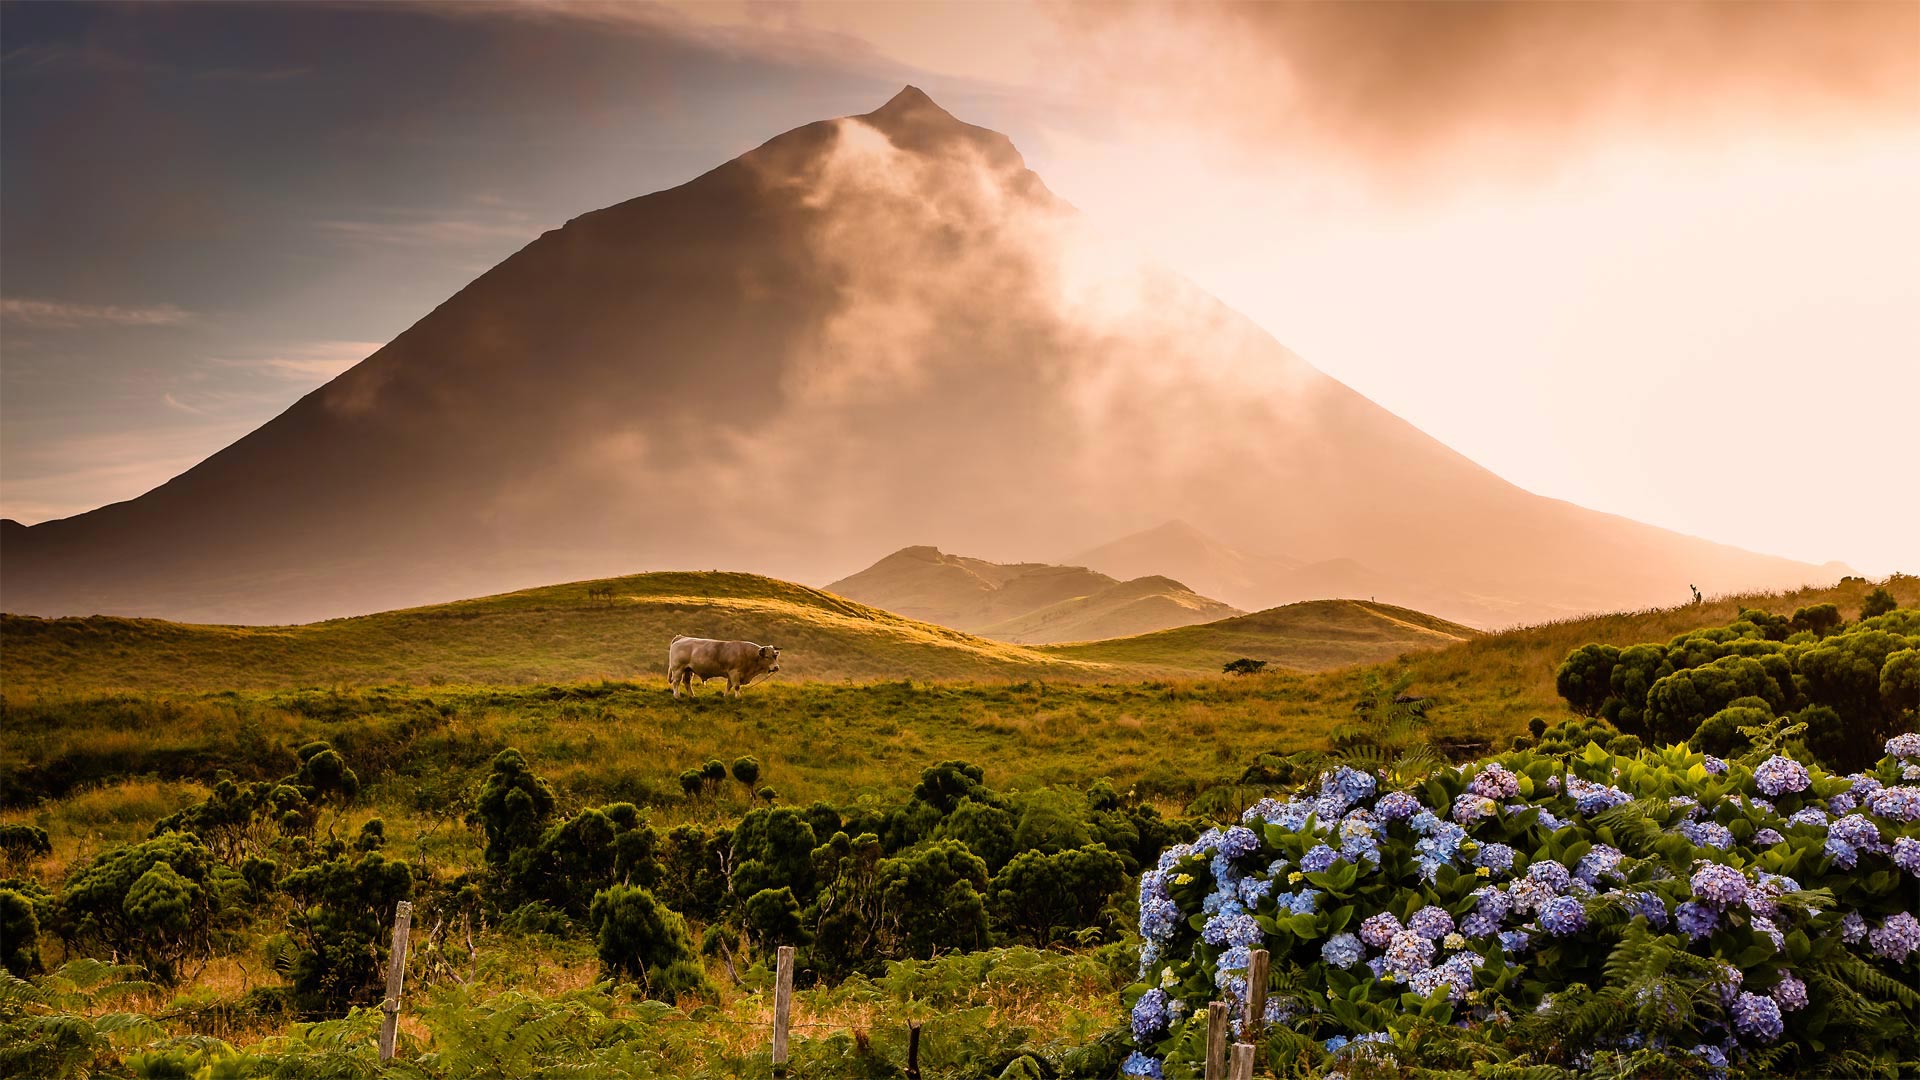 A bull in the foothills of Mount Pico on Pico Island in the Portuguese archipelago of the Azores  - Atmo-Sphere/Getty Images)